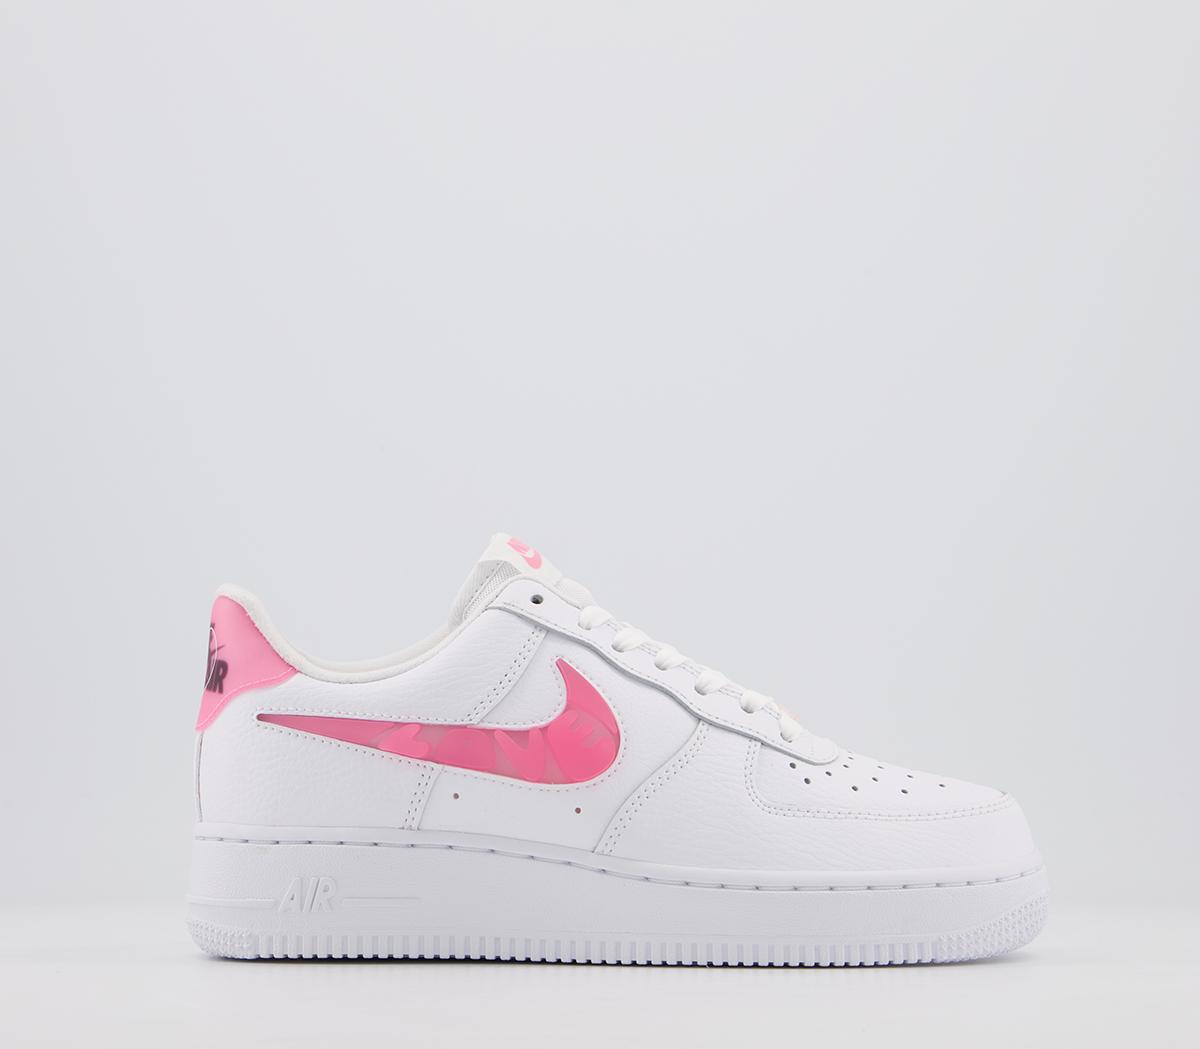 nike air force 1 07 white with black tick